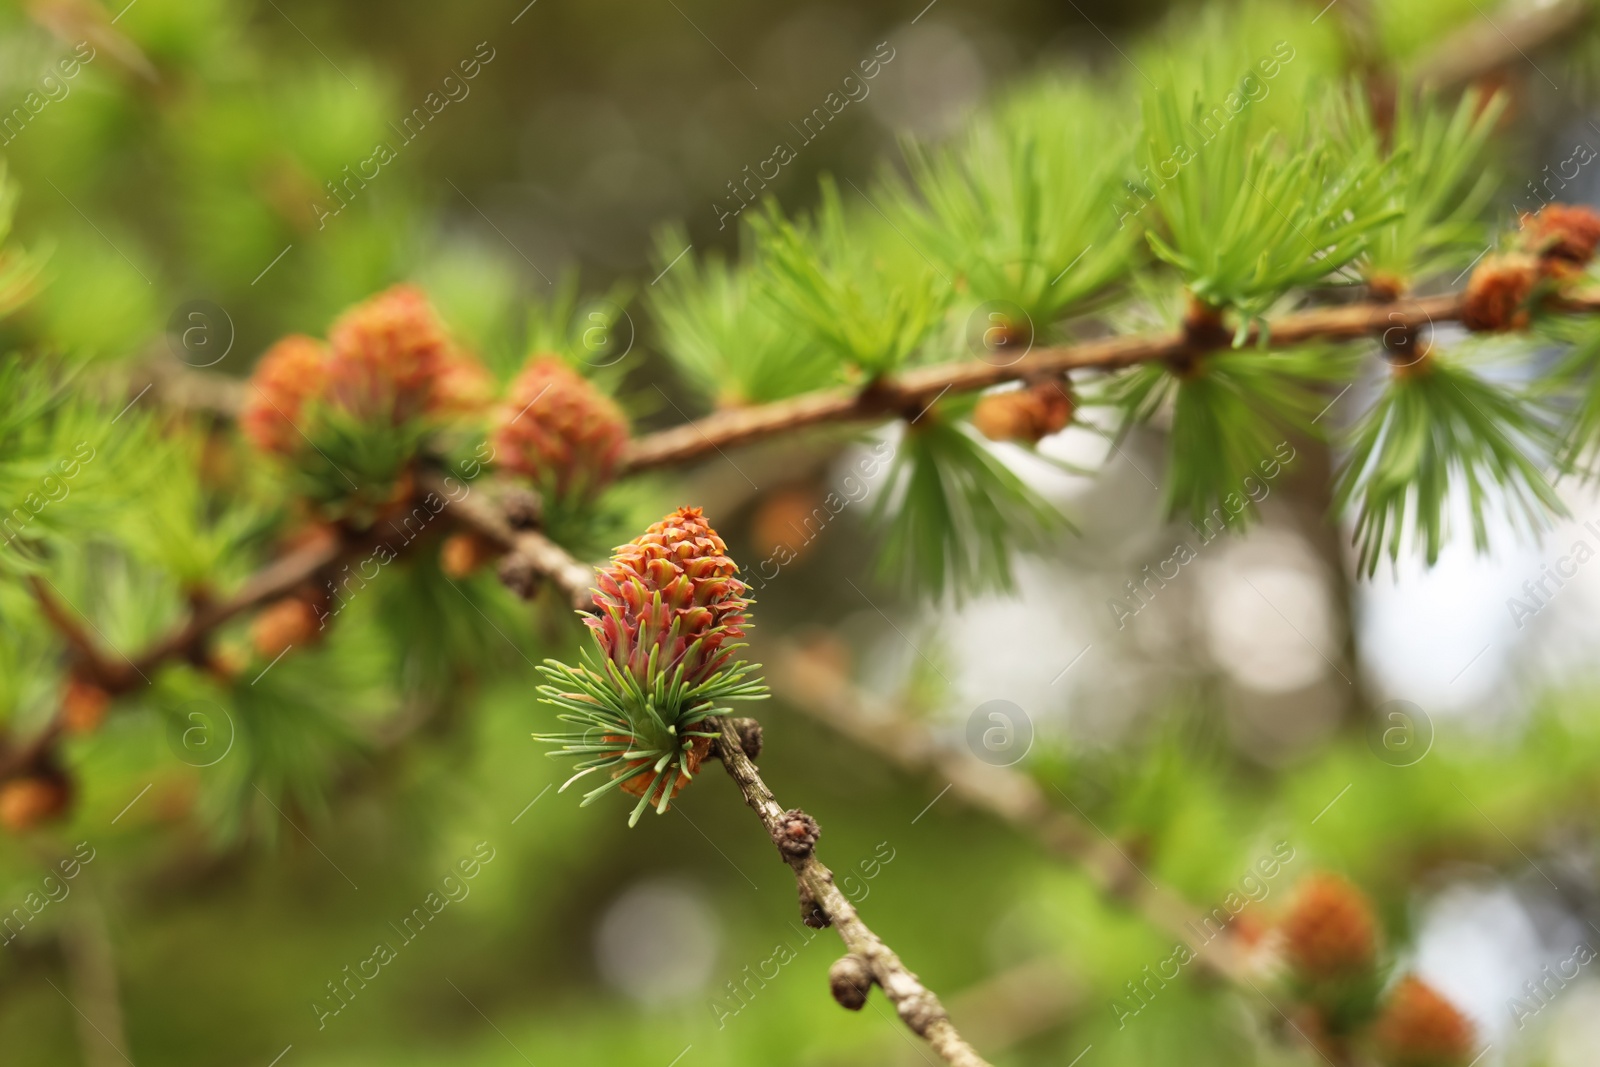 Photo of Pine tree branch with small cones against blurred background, closeup. Spring season